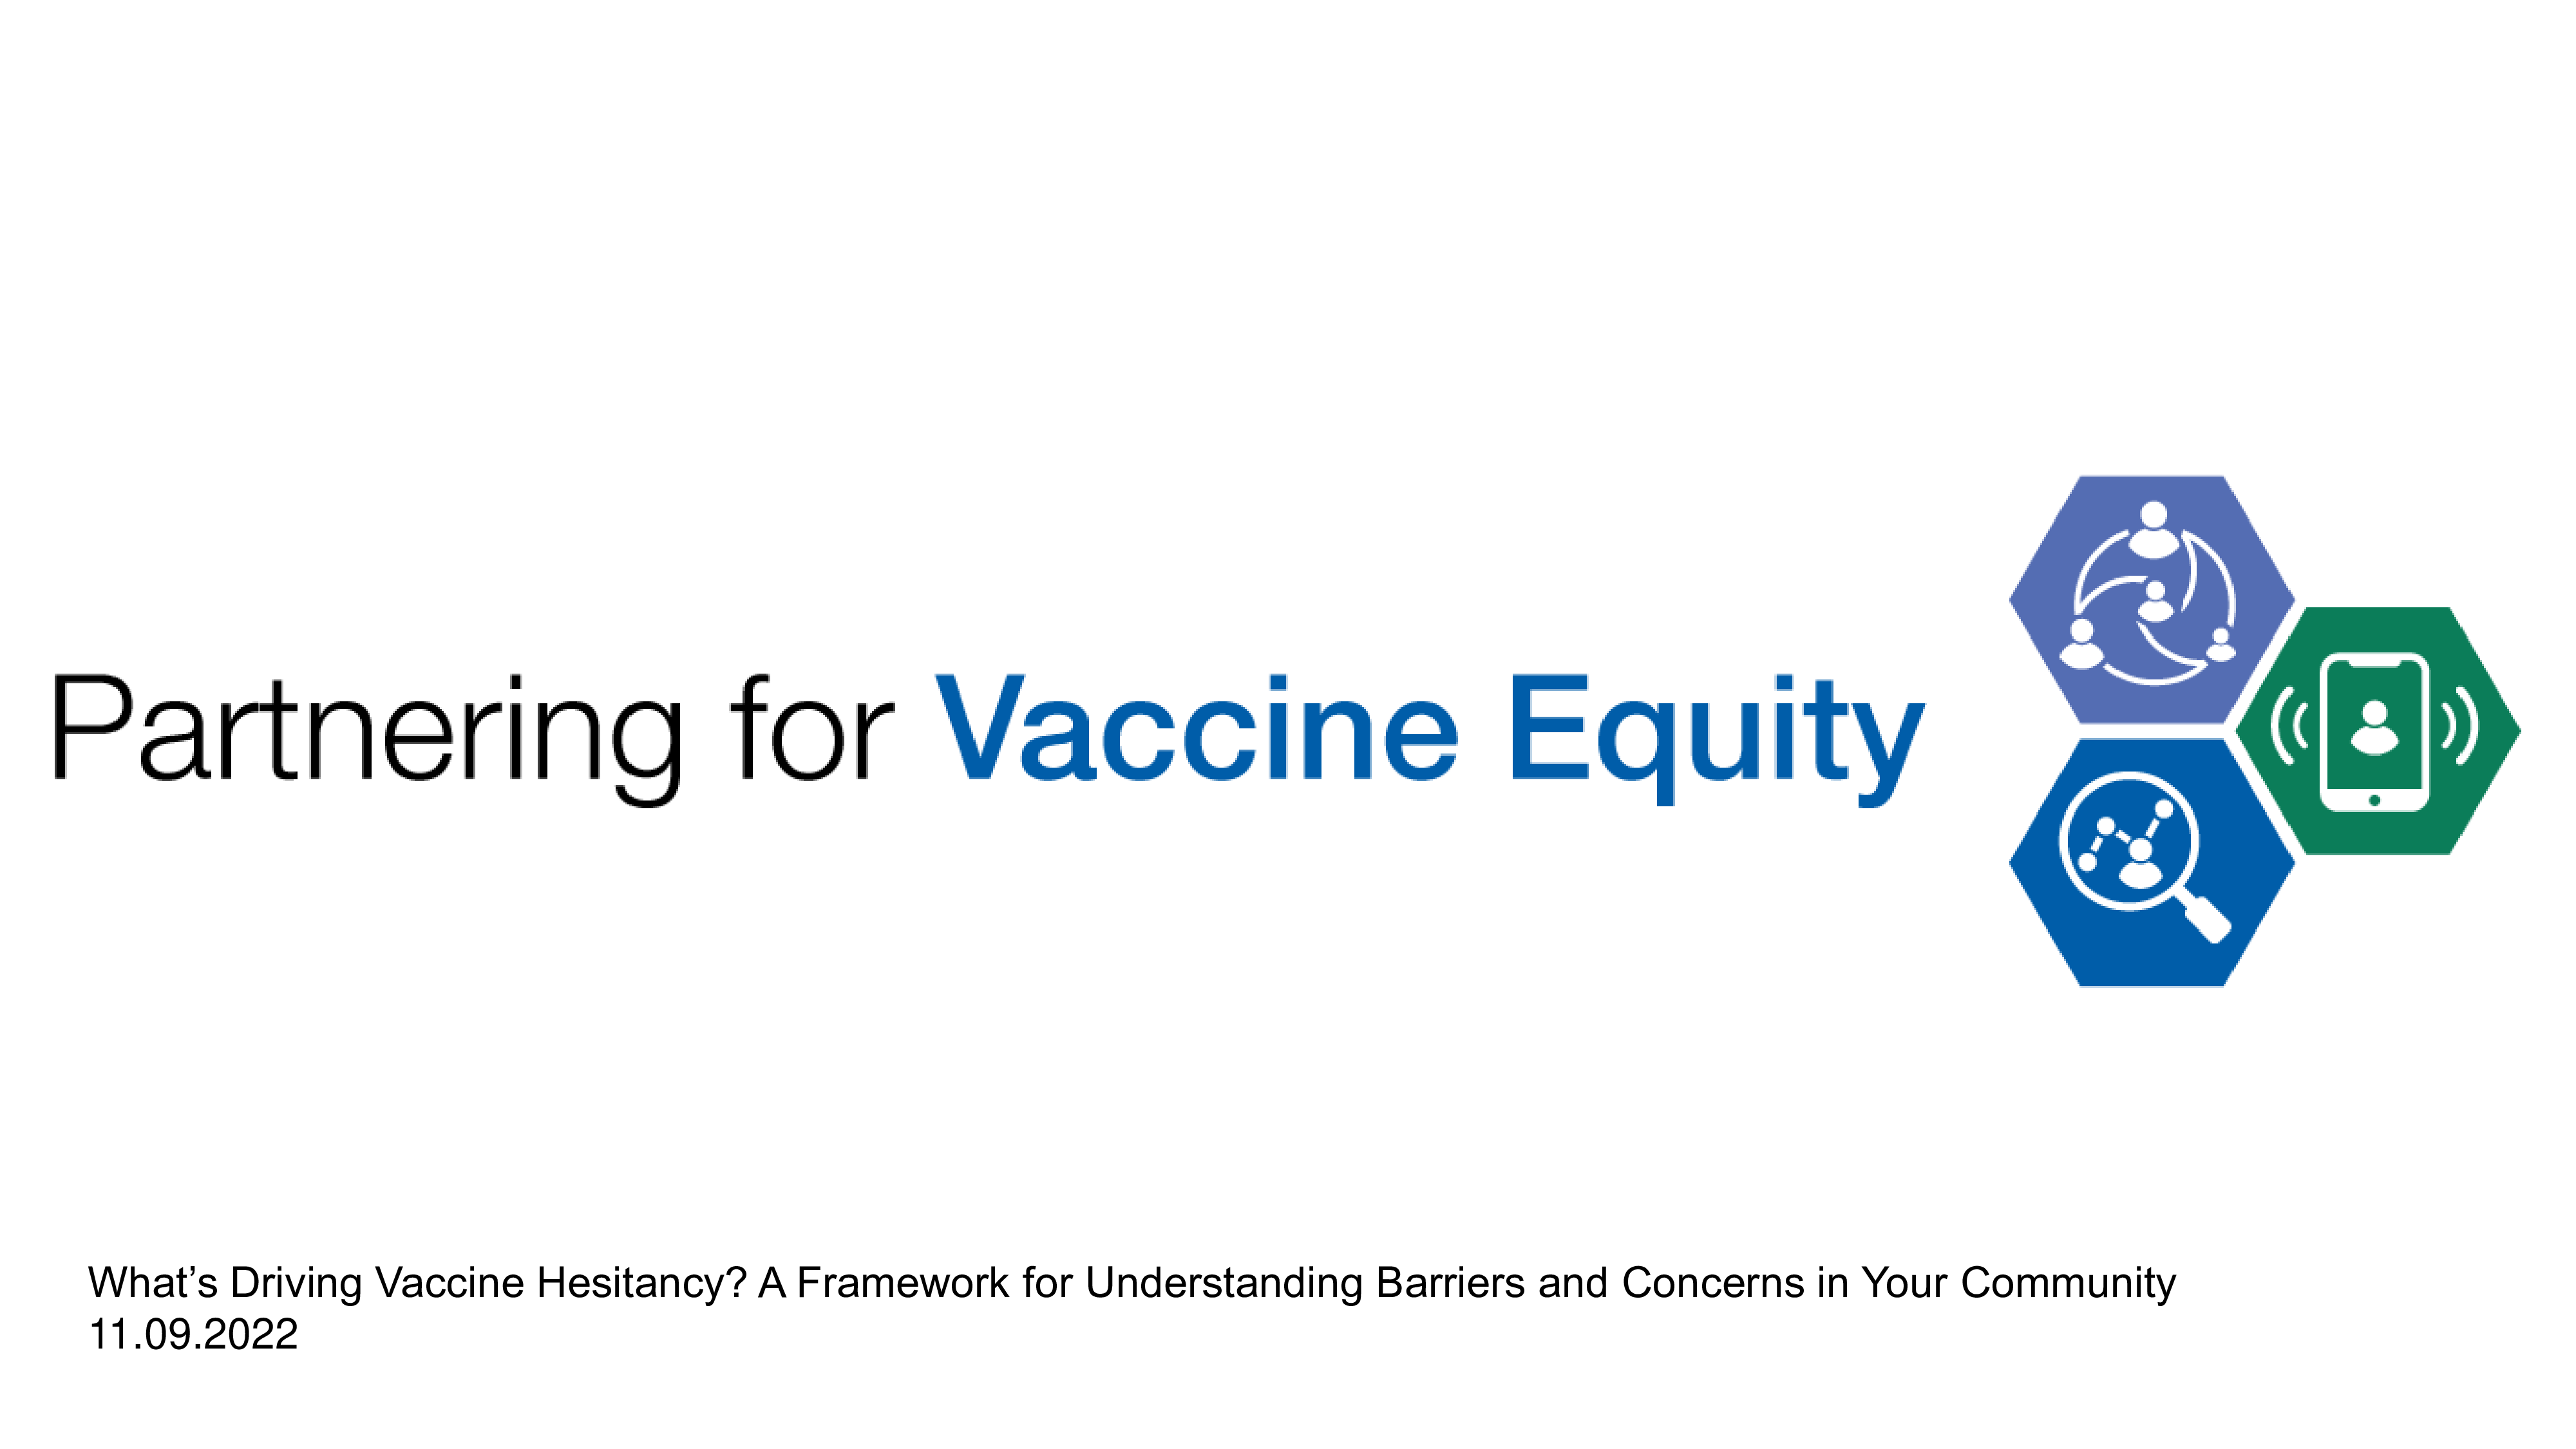 Partnering for Vaccine Equity logo